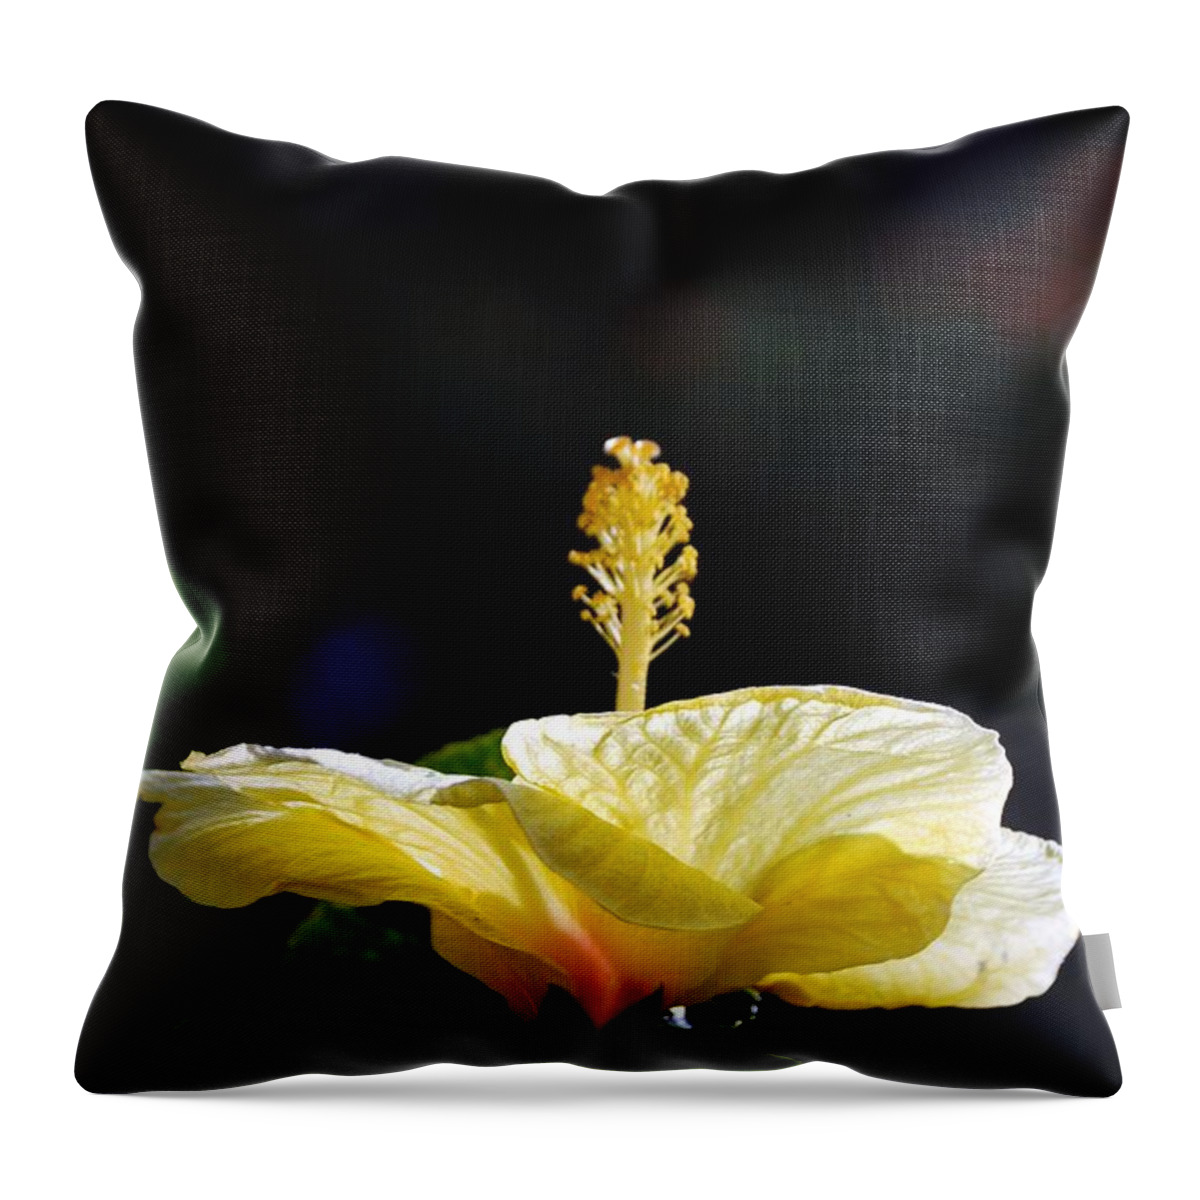 Hibiscus Throw Pillow featuring the photograph Hibiscus Morning by Debbie Karnes